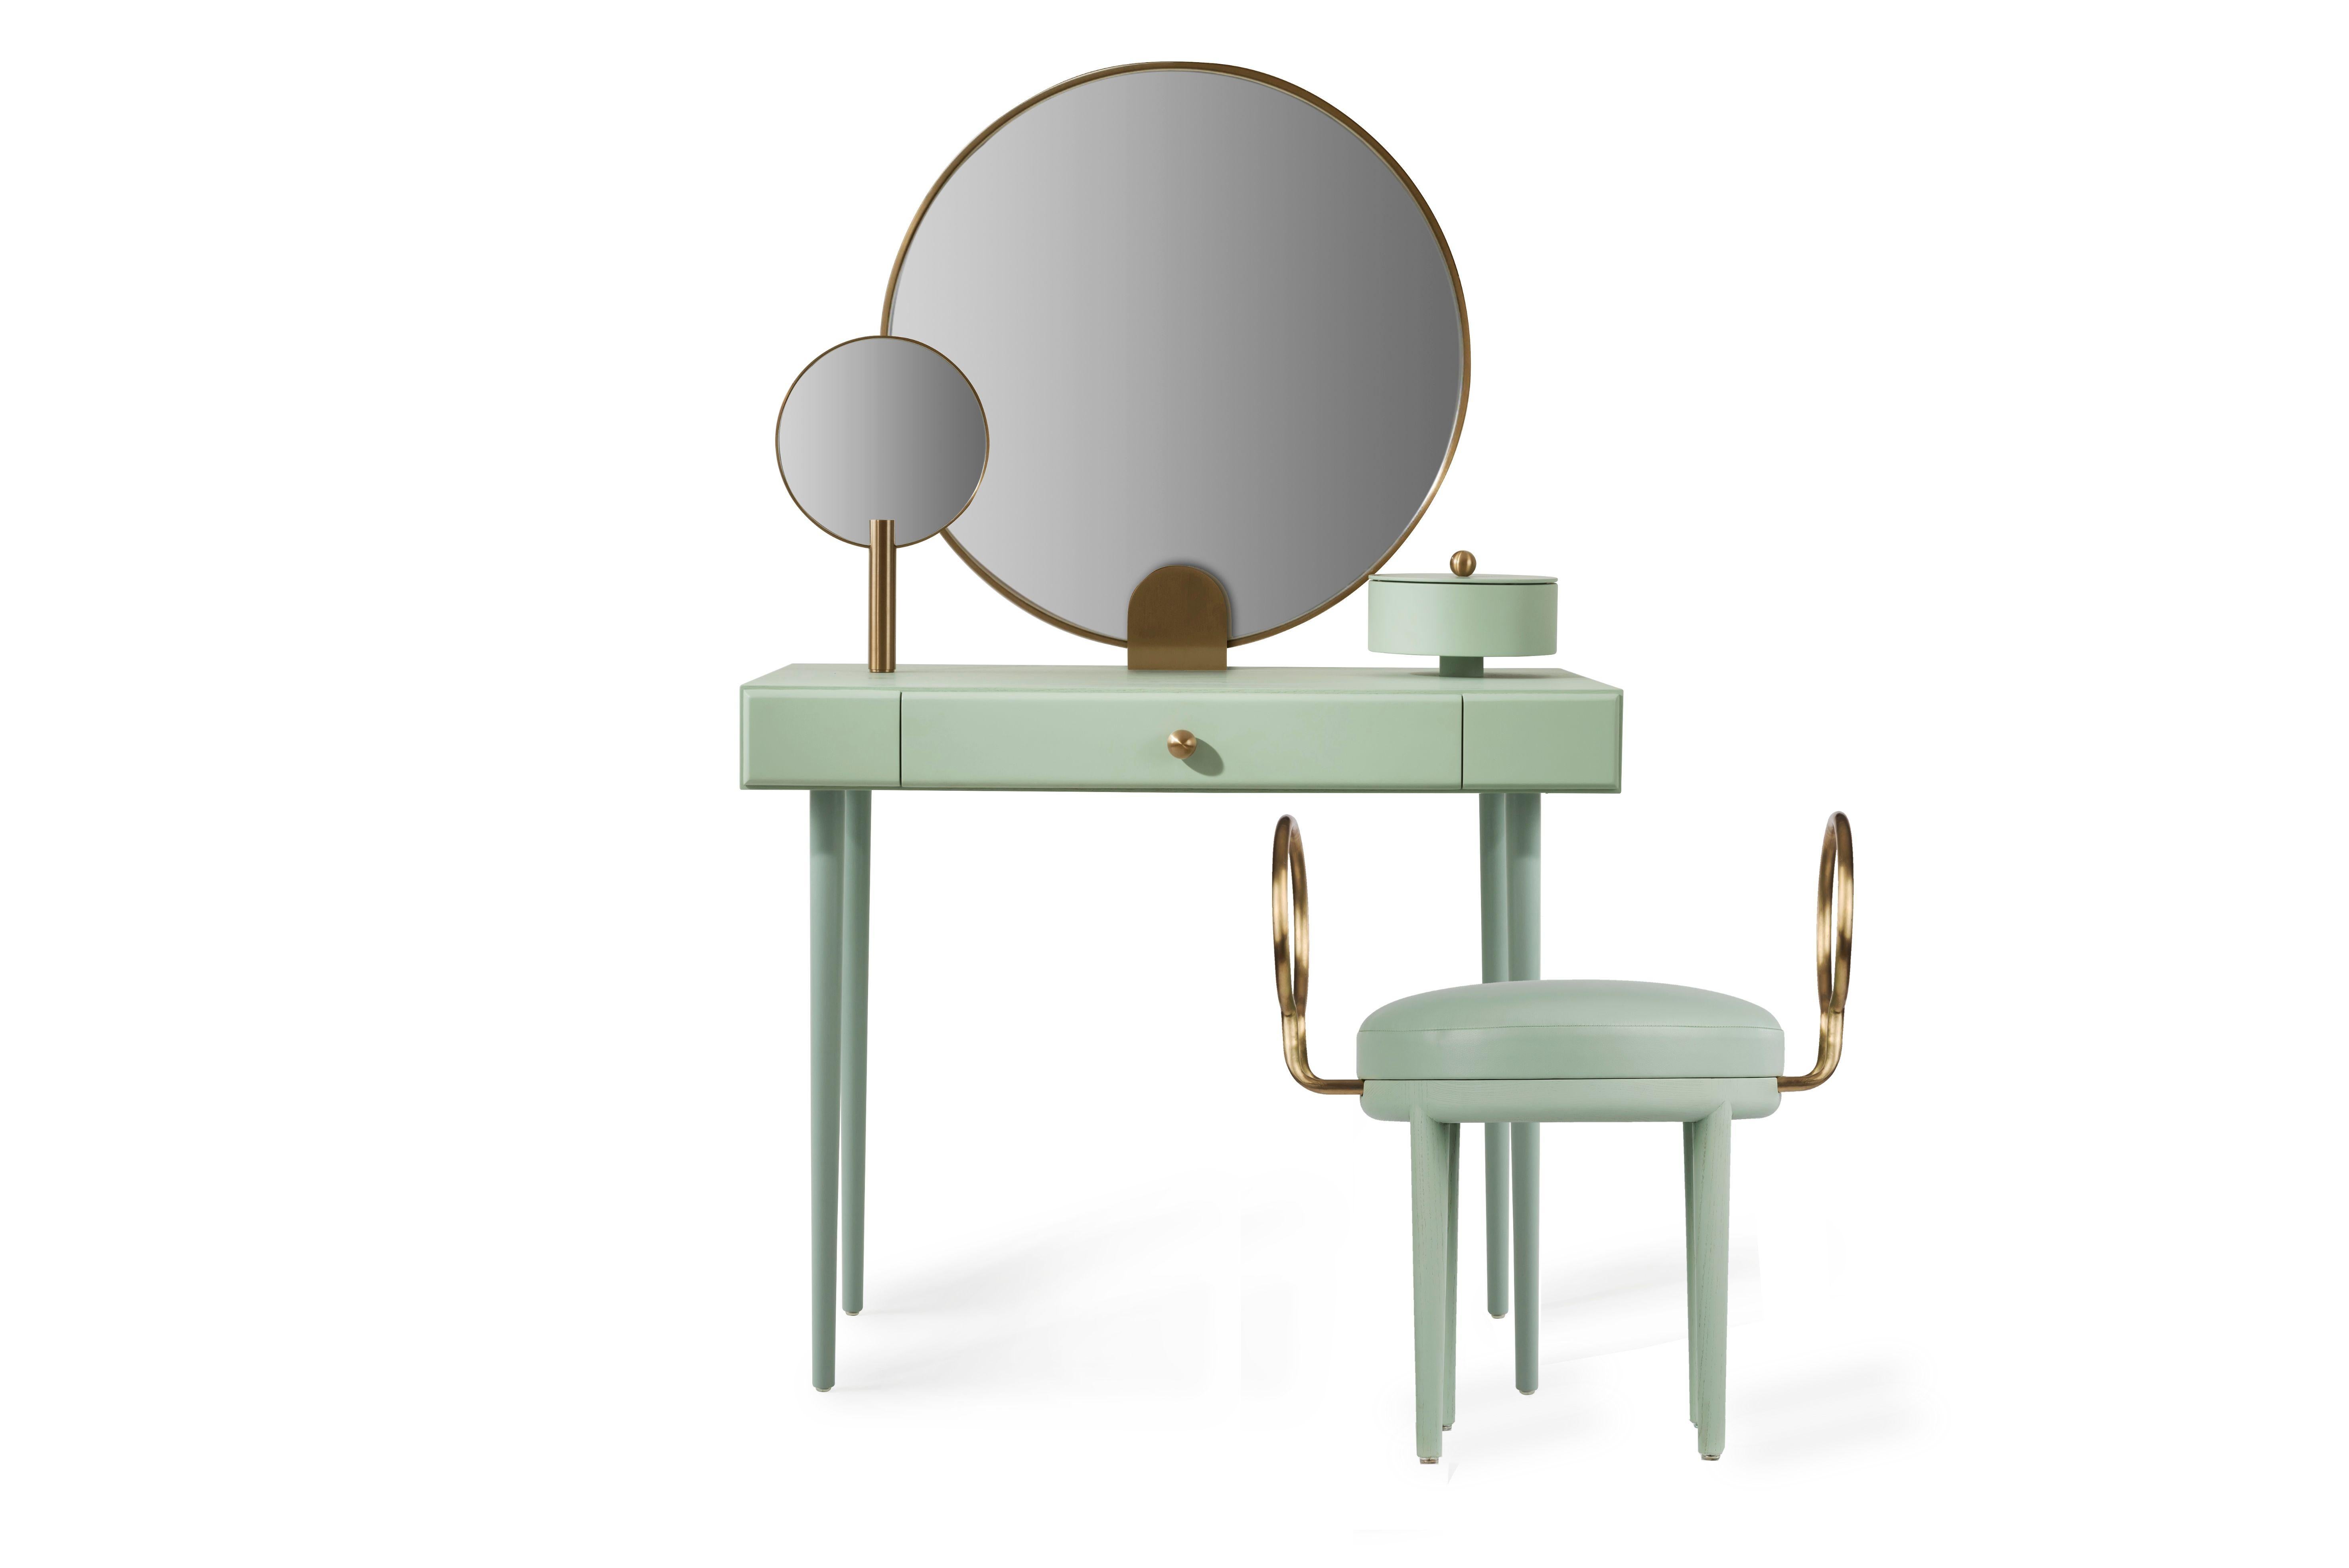 Rose Selavy vanity desk with stool by Thomas Dariel, Maison Dada
Vanity desk • W 94* D 59 * H 139.5 cm
Stool • W 57 * D 43 * H 64 cm
Desktop in painted ash veneer • fronts in matte paint finish
Structure in MDF • Metal legs with painted ash